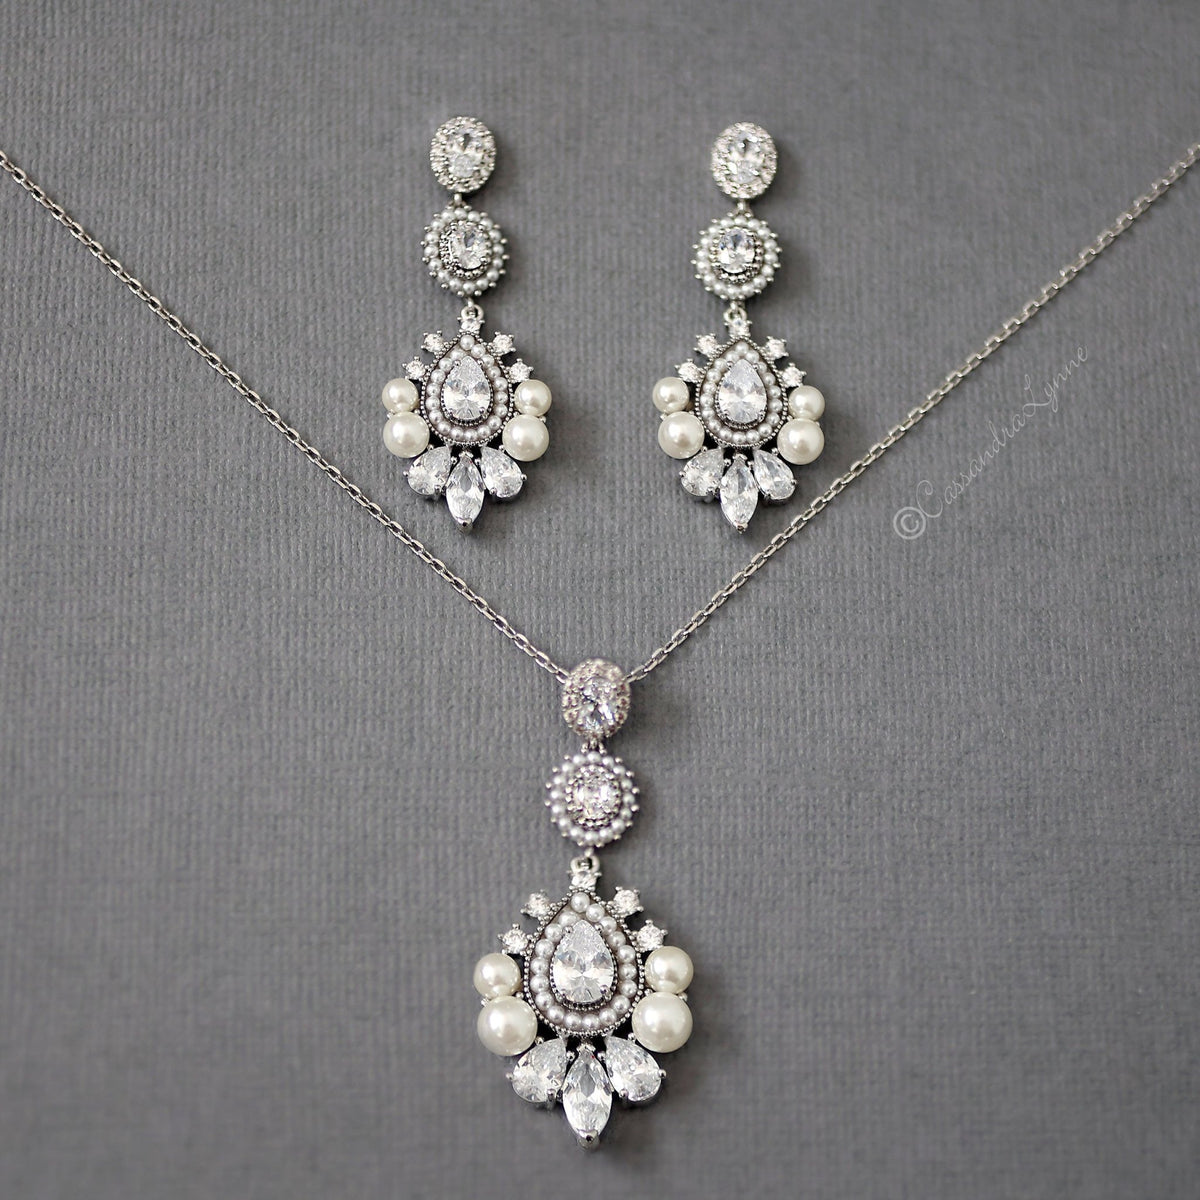 Vintage Pearl Earrings and Pendant Necklace Set - Cassandra Lynne